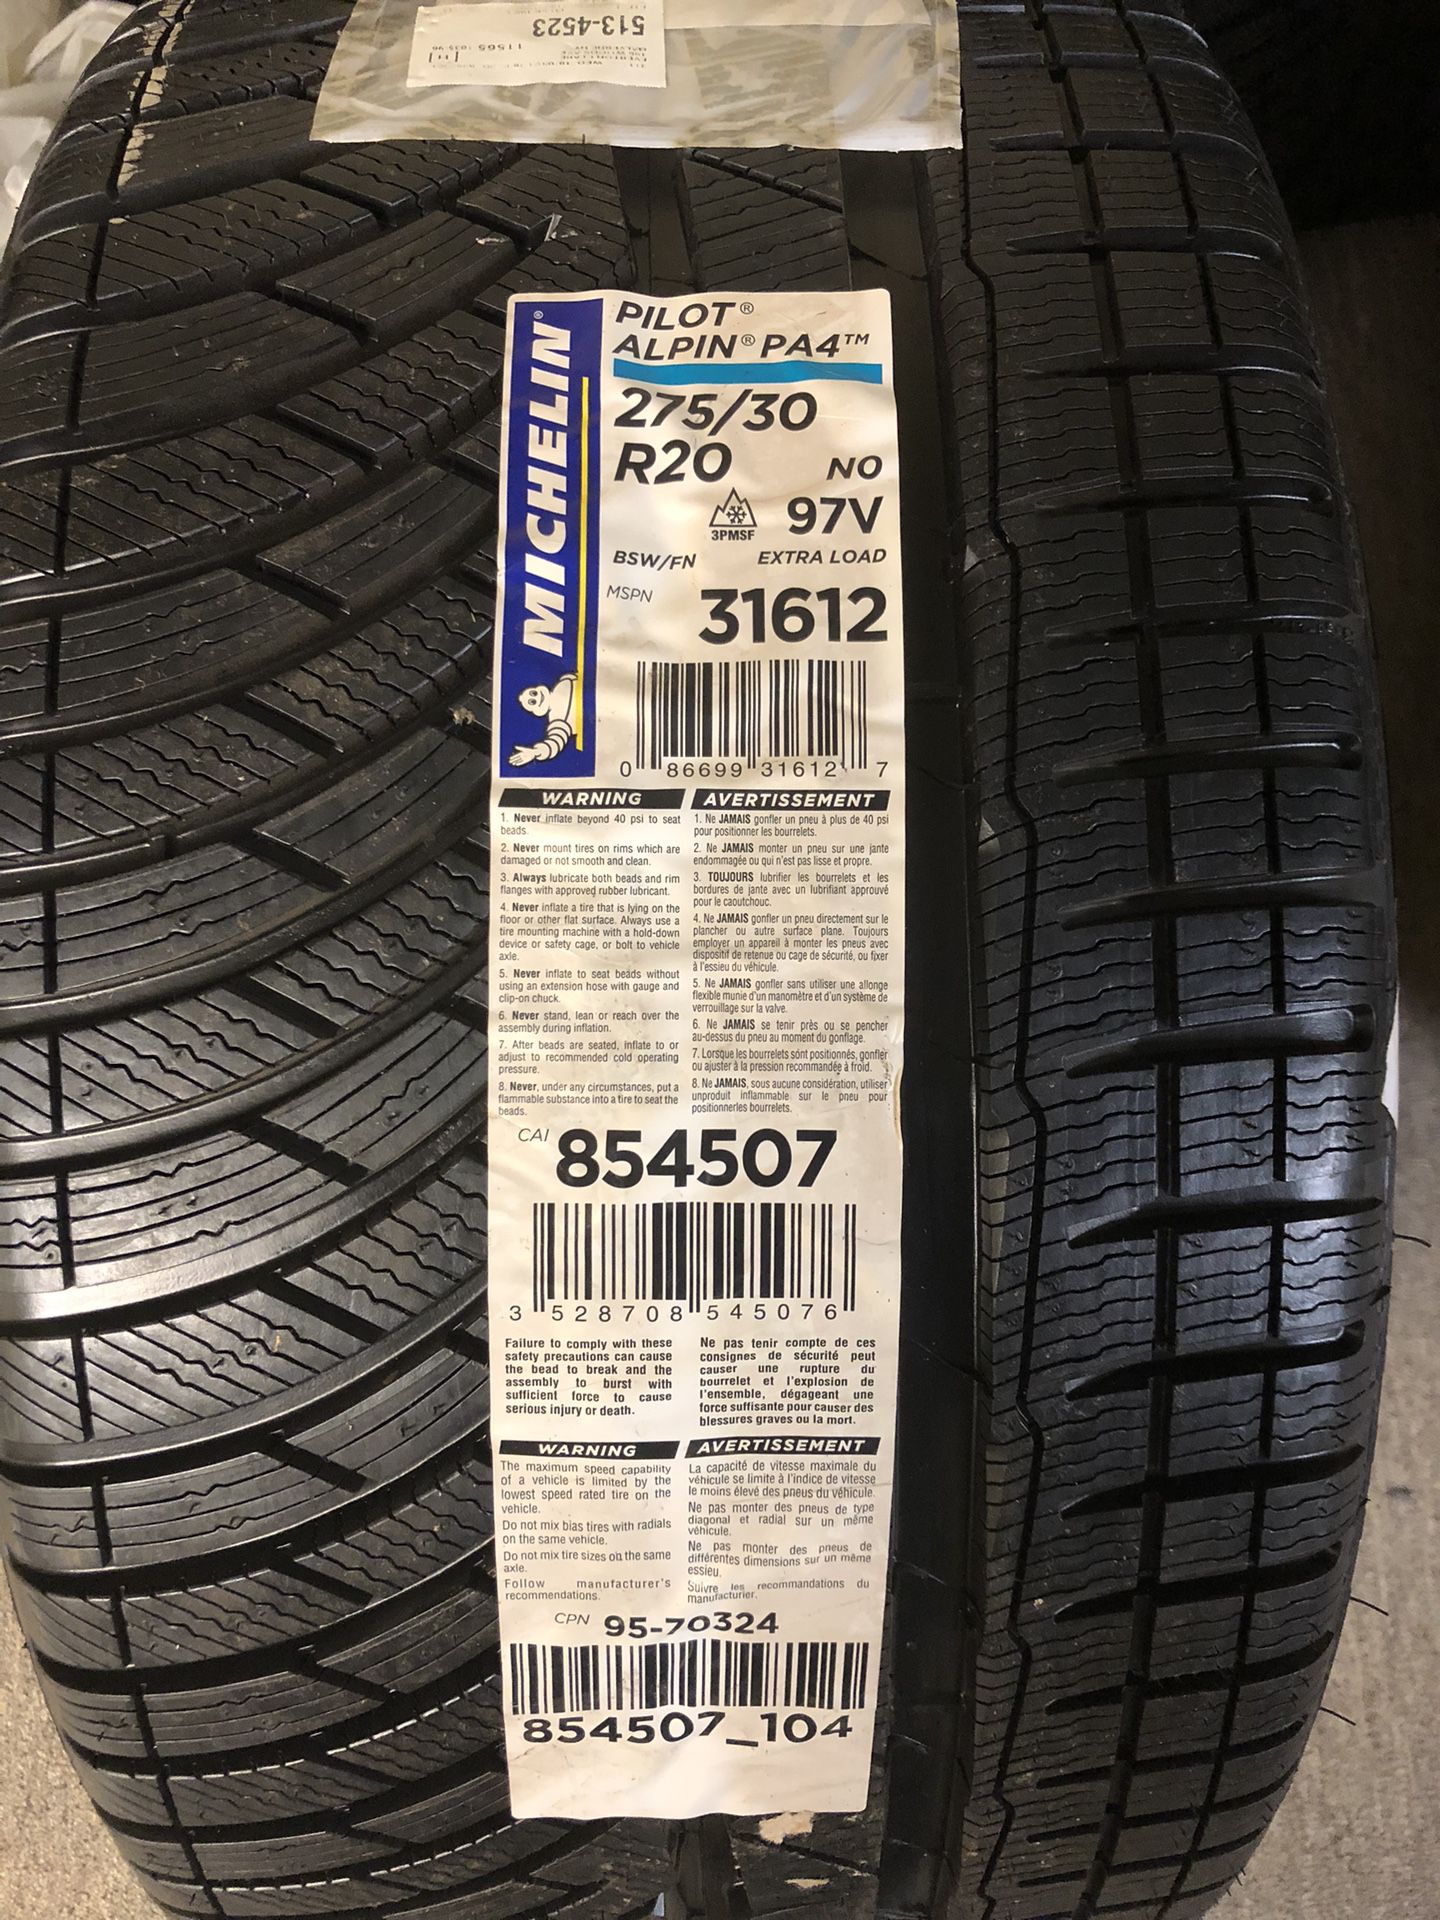 Michelin Pilot Alpin PA4 Tires - OfferUp 31612 275/30R20 Sale NY Queens, in for